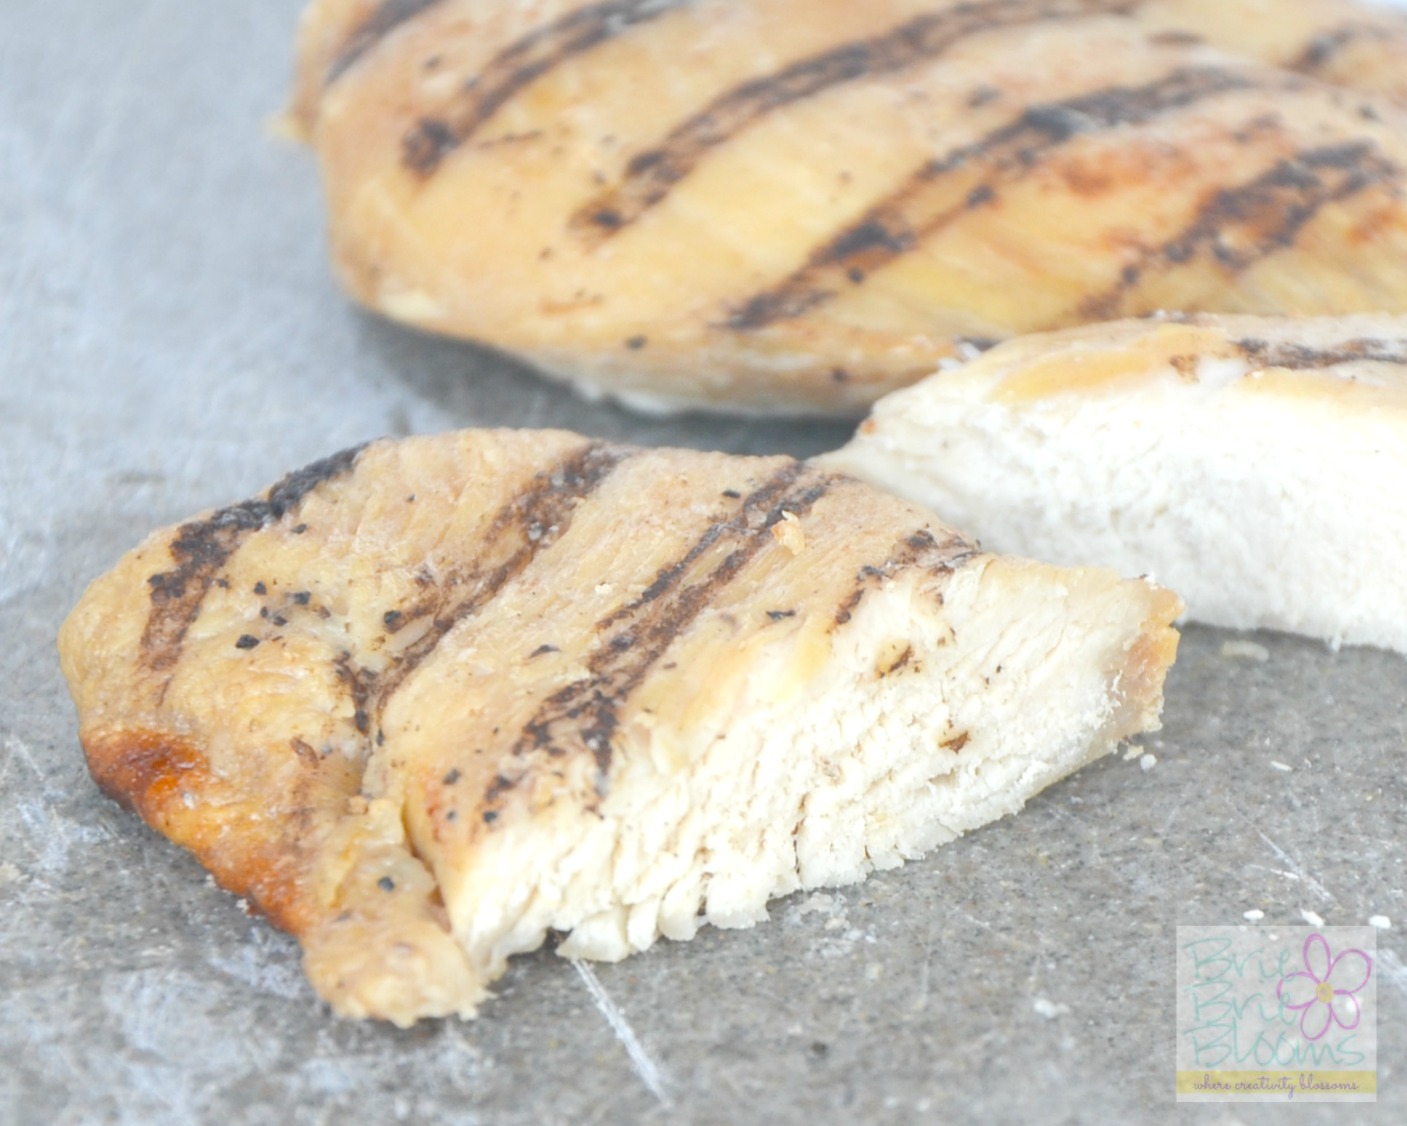 tyson-gluten-free-grilled-and-ready-cooken-chicken-breast-fillets